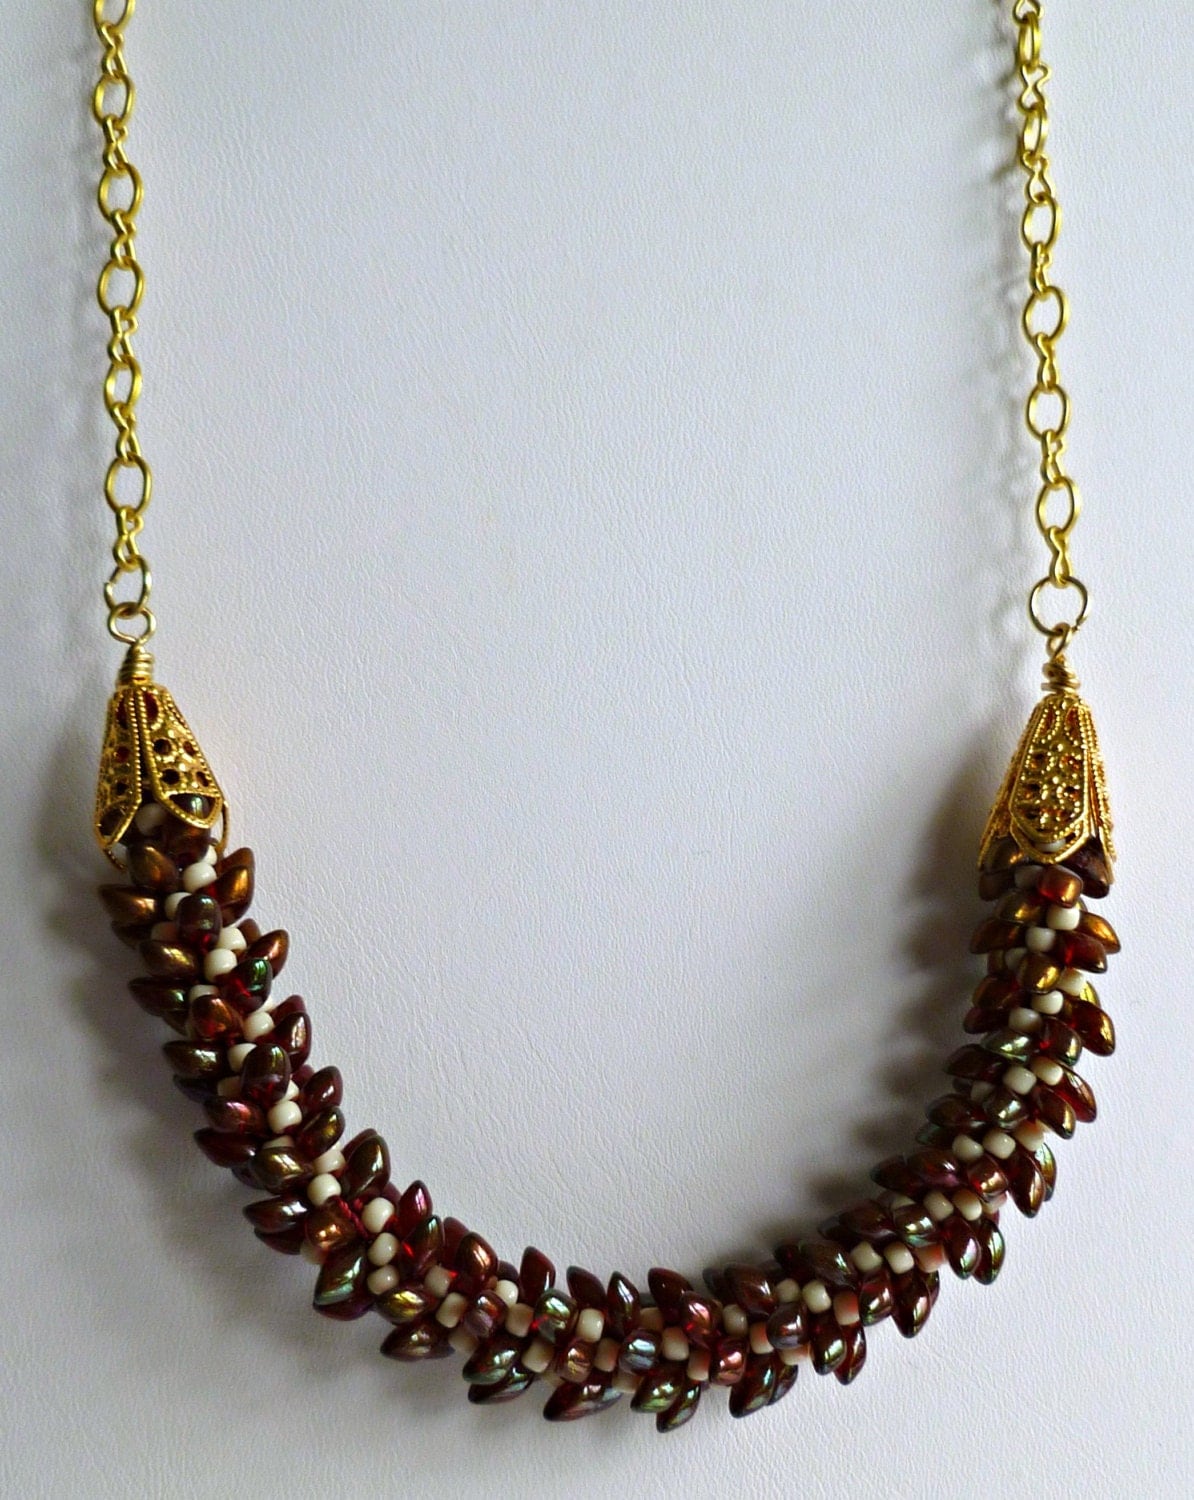 Adjustable length beaded Kumihimo cluster necklace